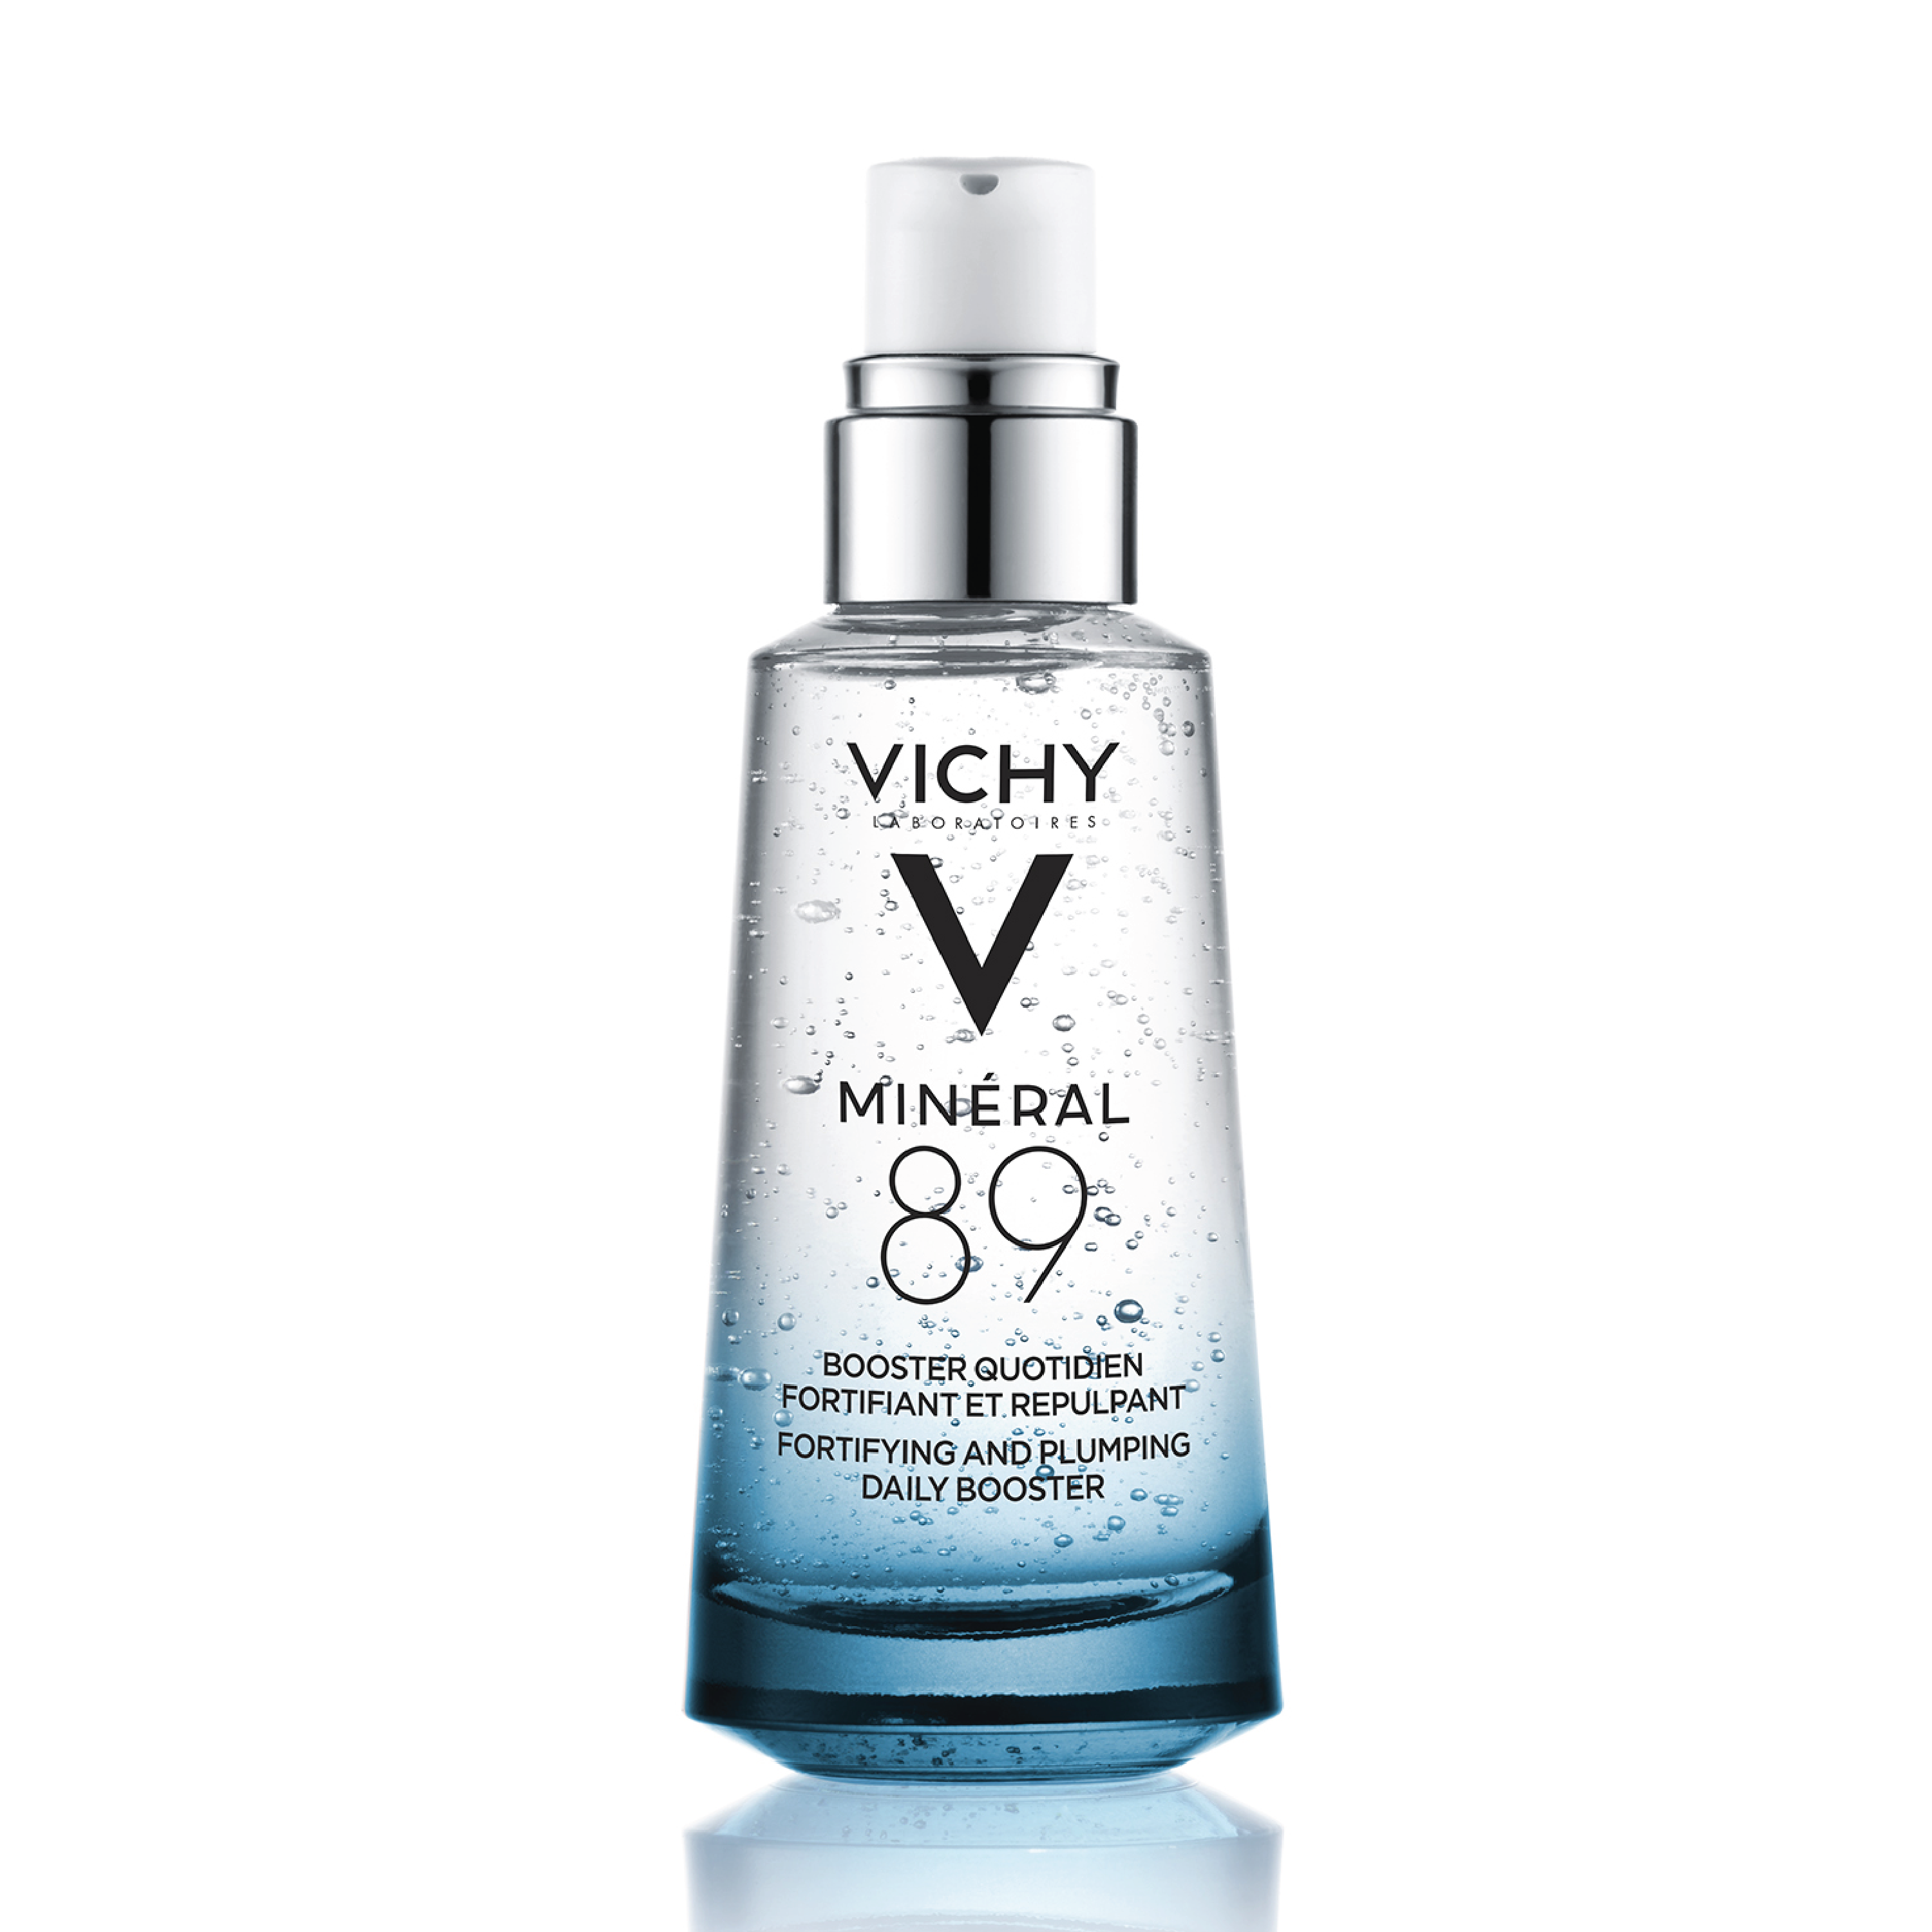 Vichy Mineral 89 Booster, 50 ml